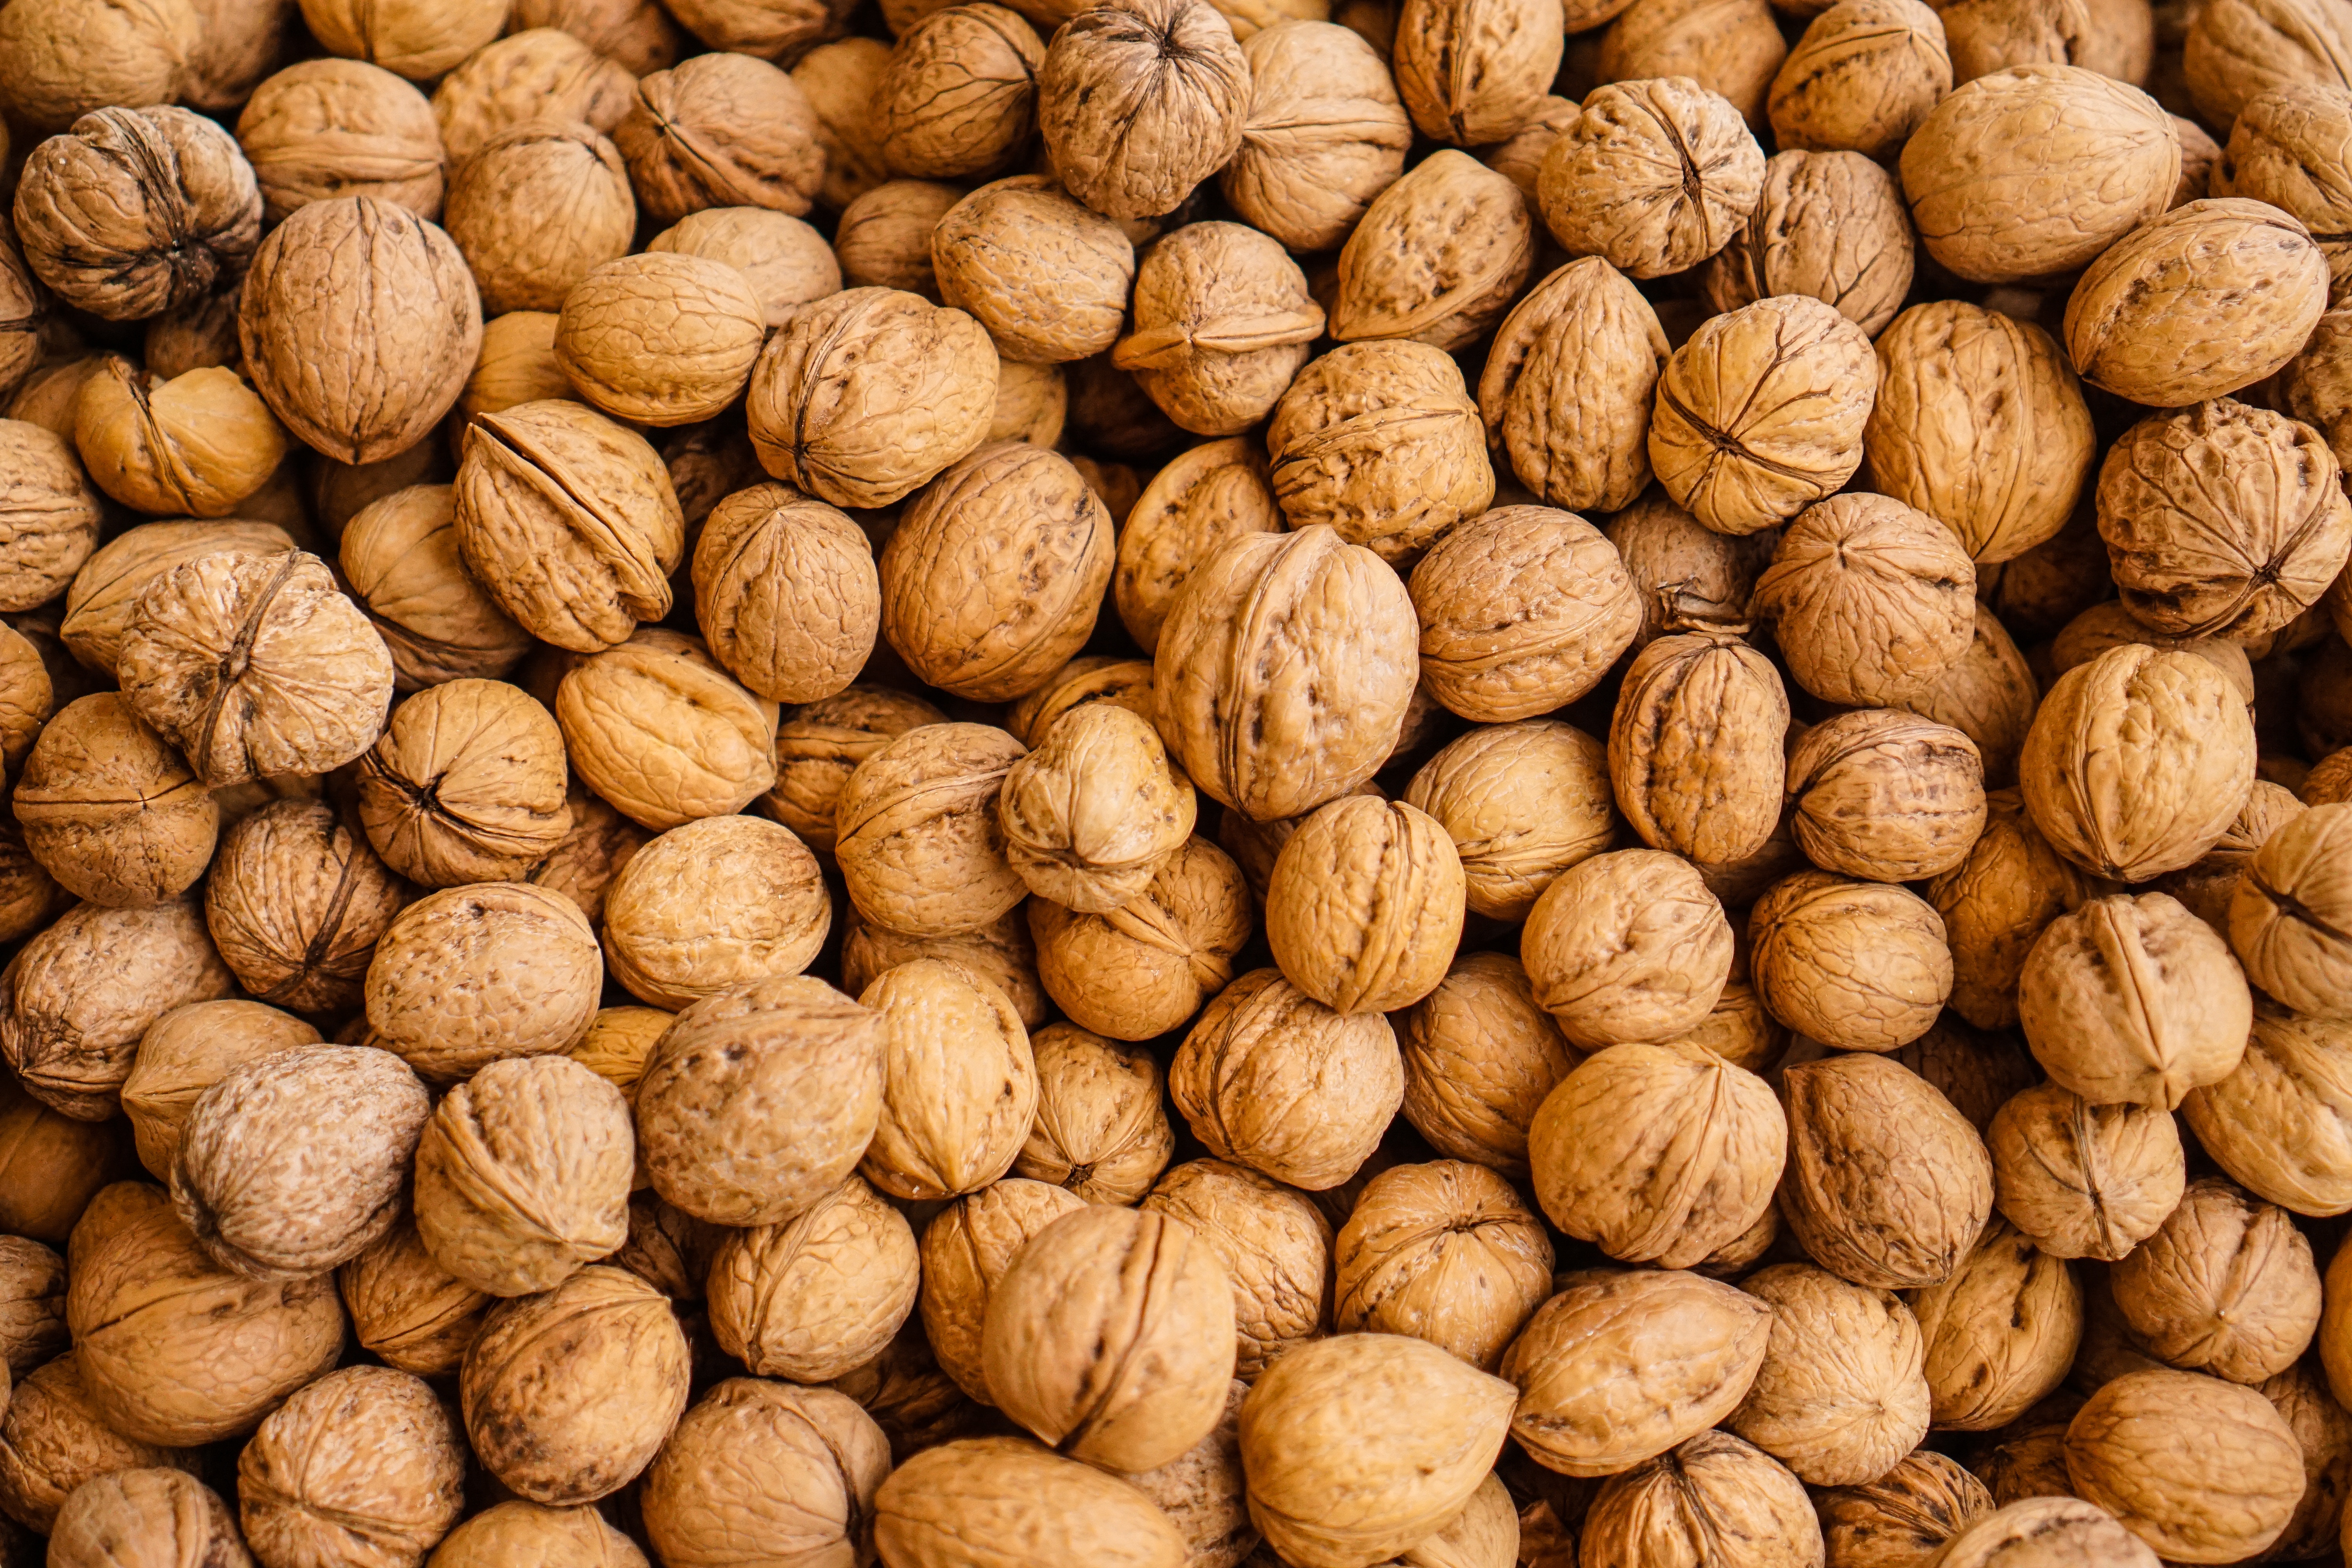 walnuts are a source of vegan protein